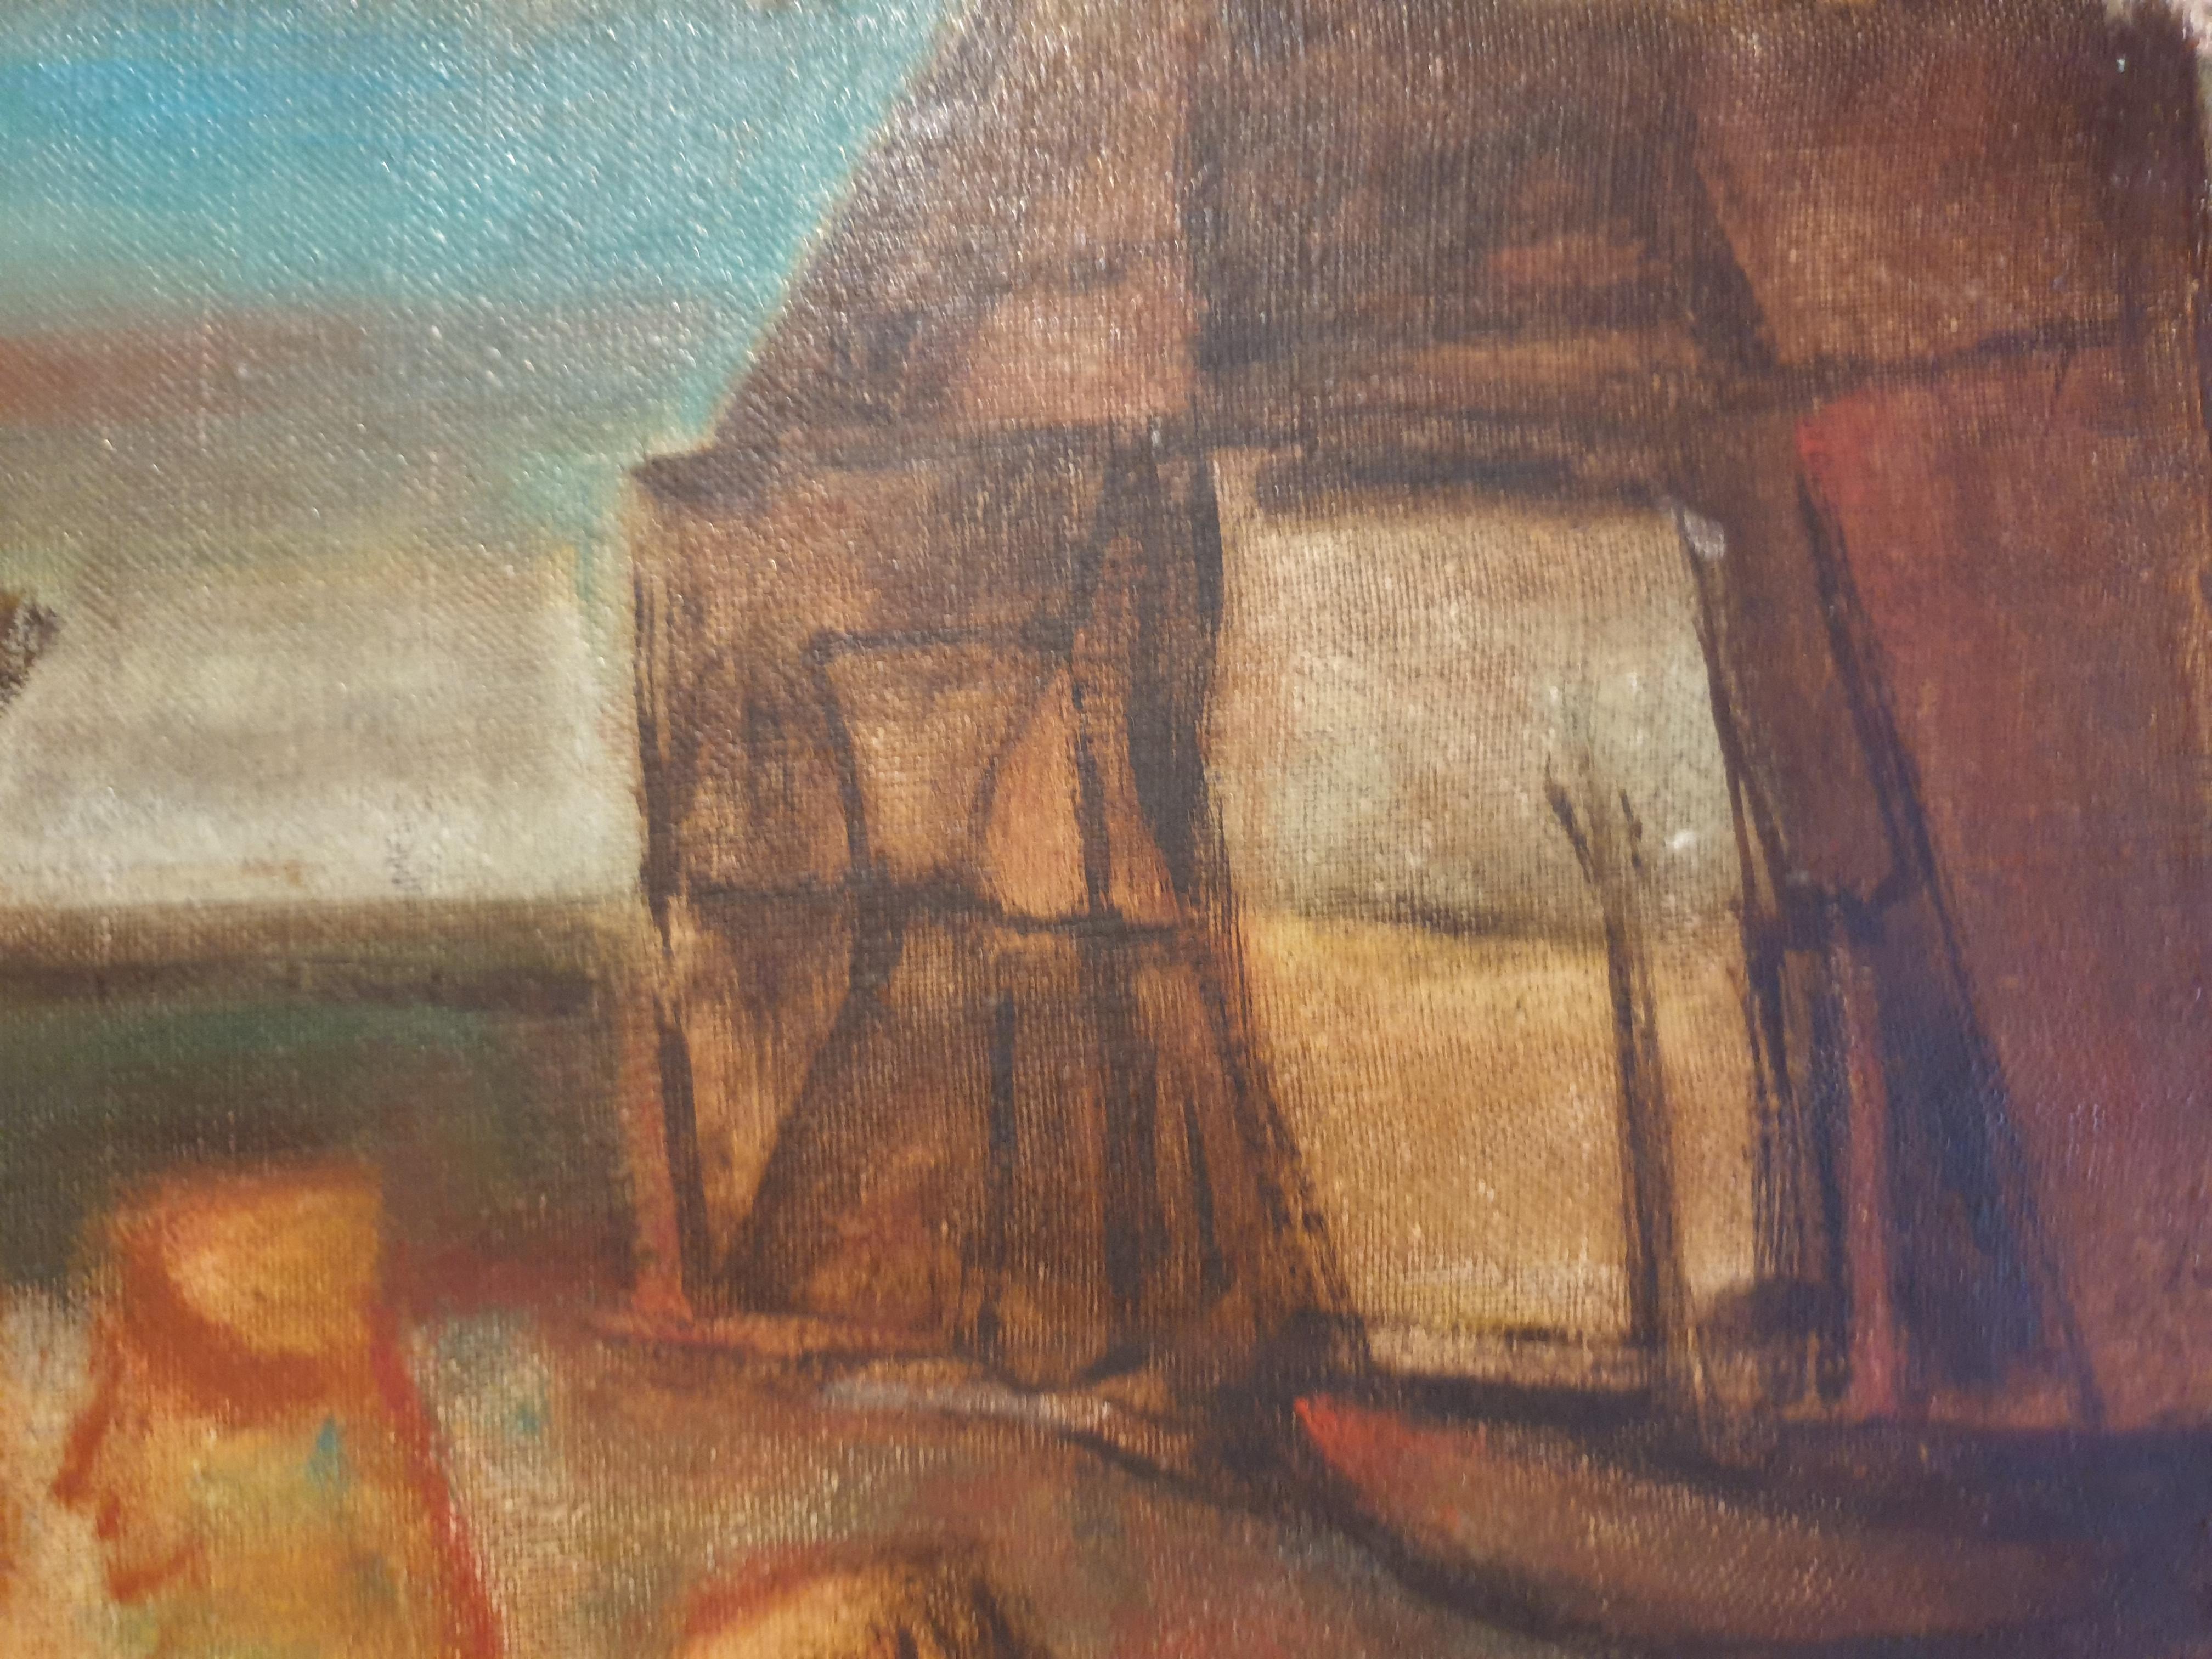 Mid 20th century oil on canvas of a crowded harbour scene, showing the local fisherman or sailors saying farewell to their families before going to sea. The painting is signed bottom right but the artist remains as yet unidentified.

A colourful yet